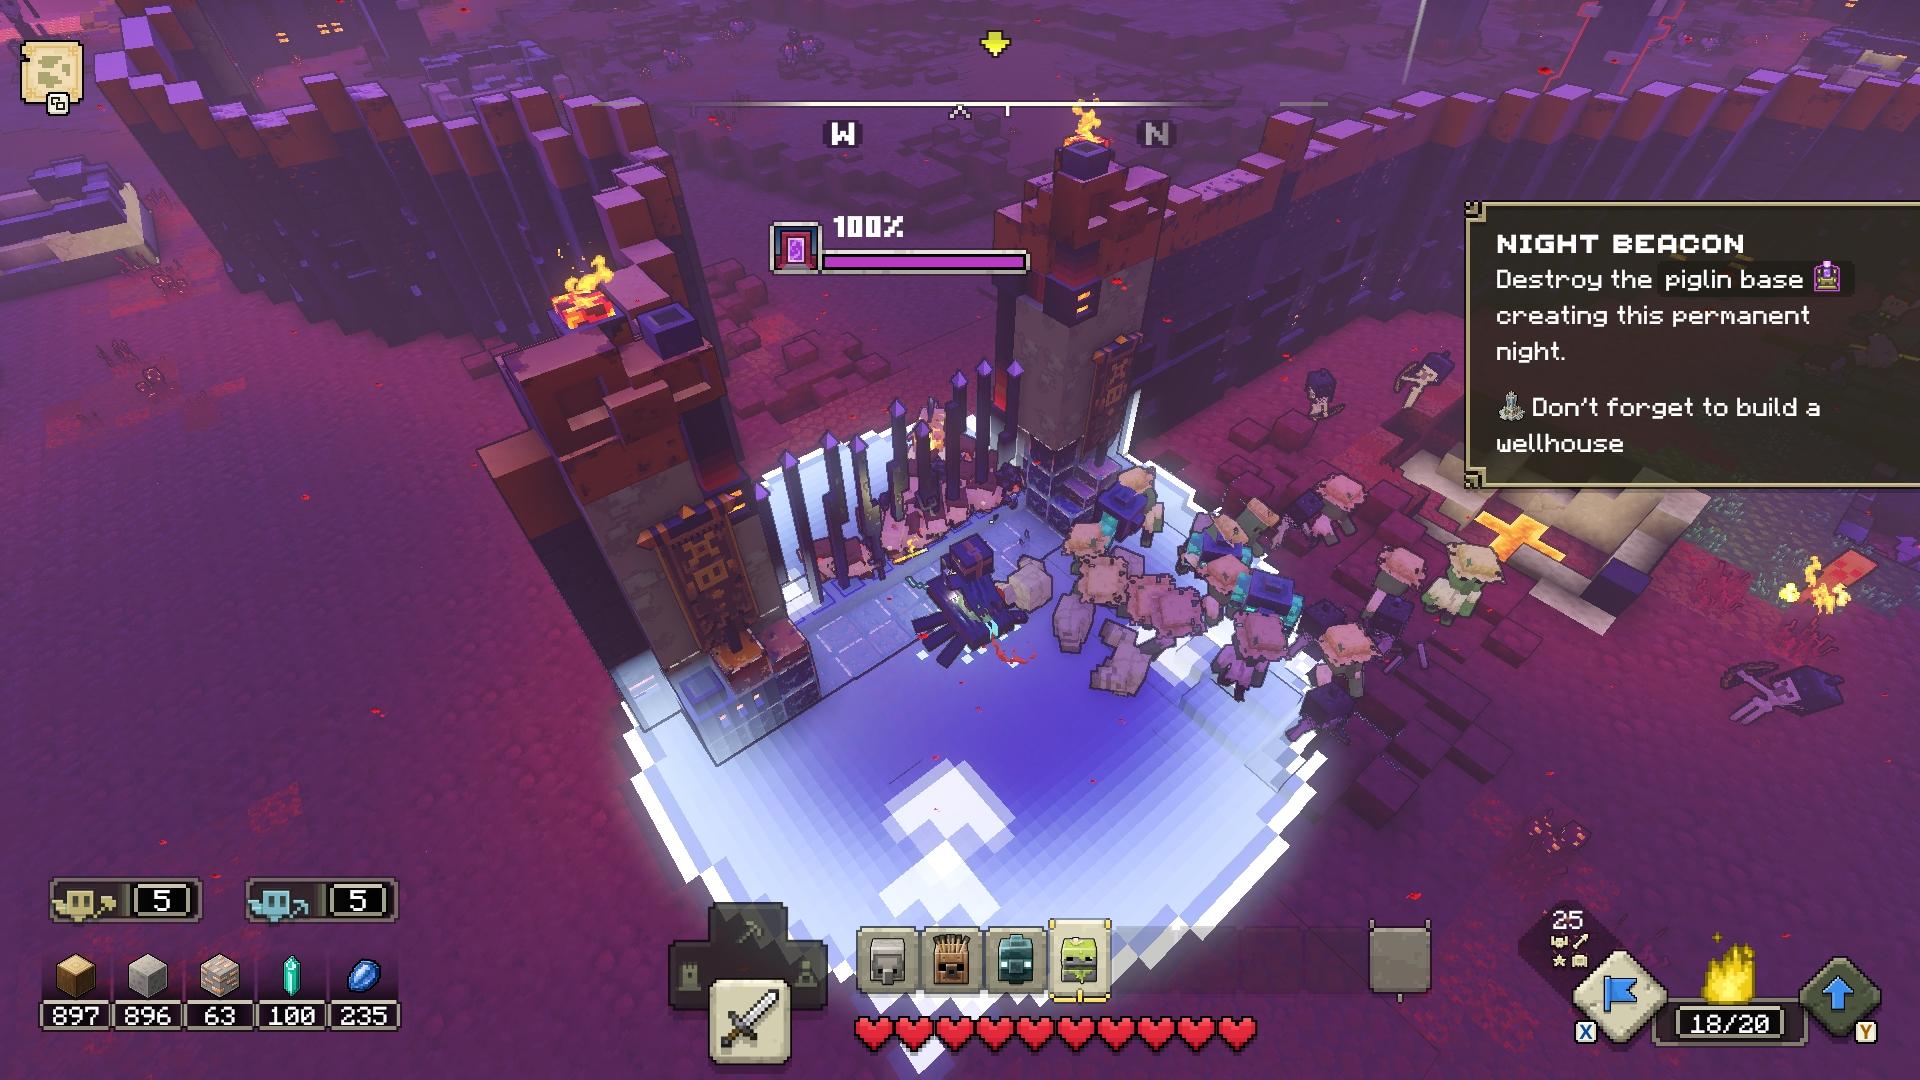 Minecraft Legends is a curious and charming blend of adventure and